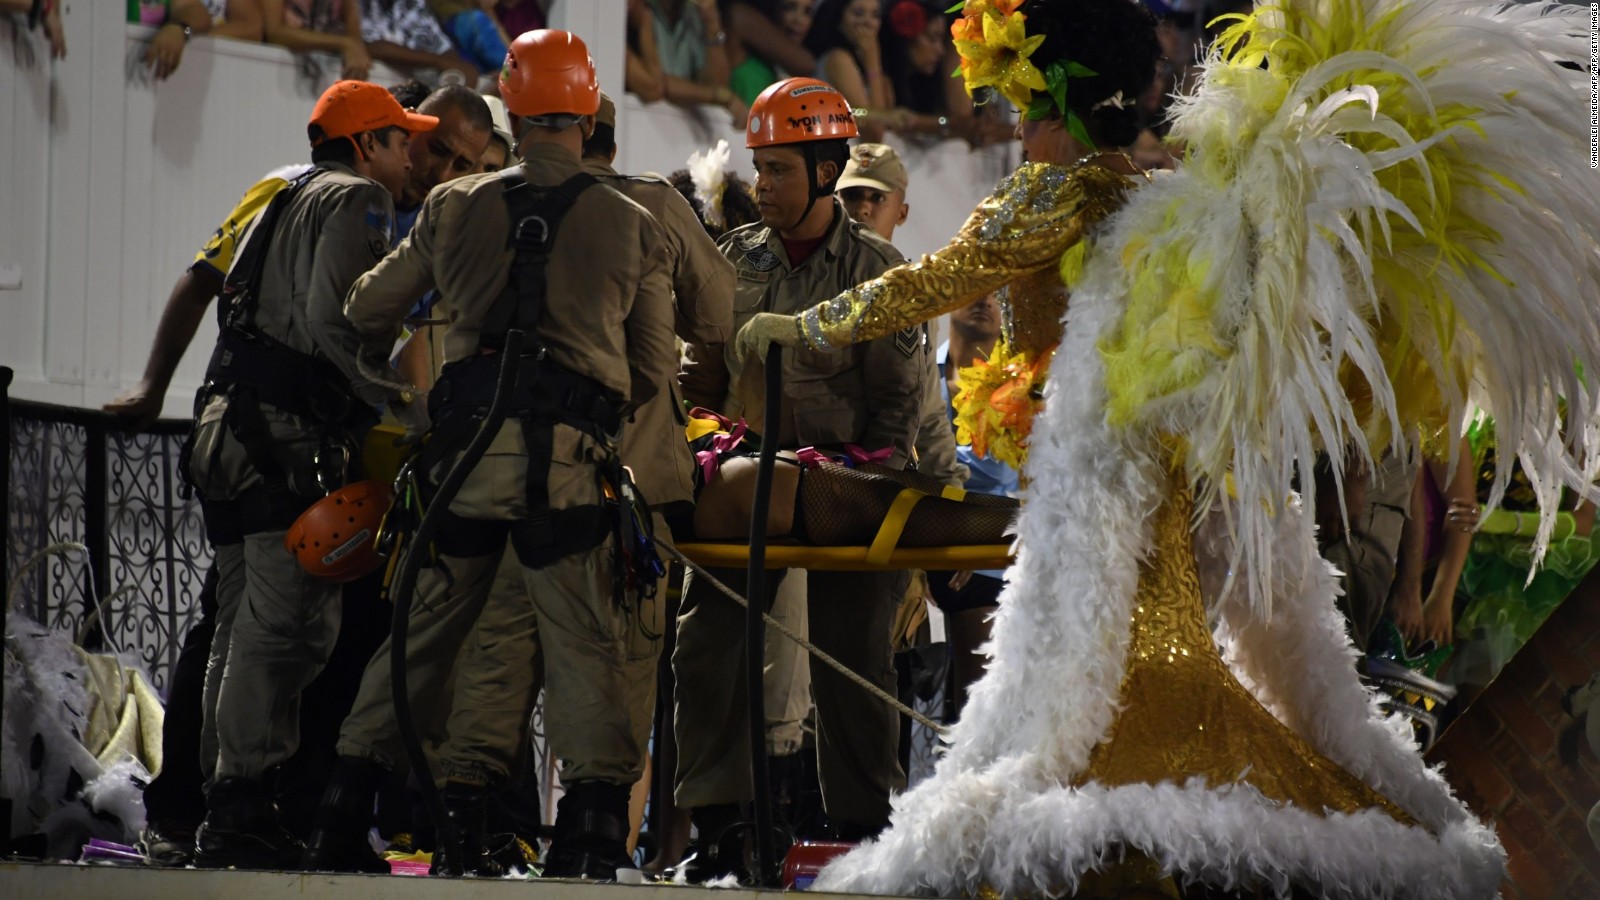 Rio Carnival float collapses, injuring 11 CNN